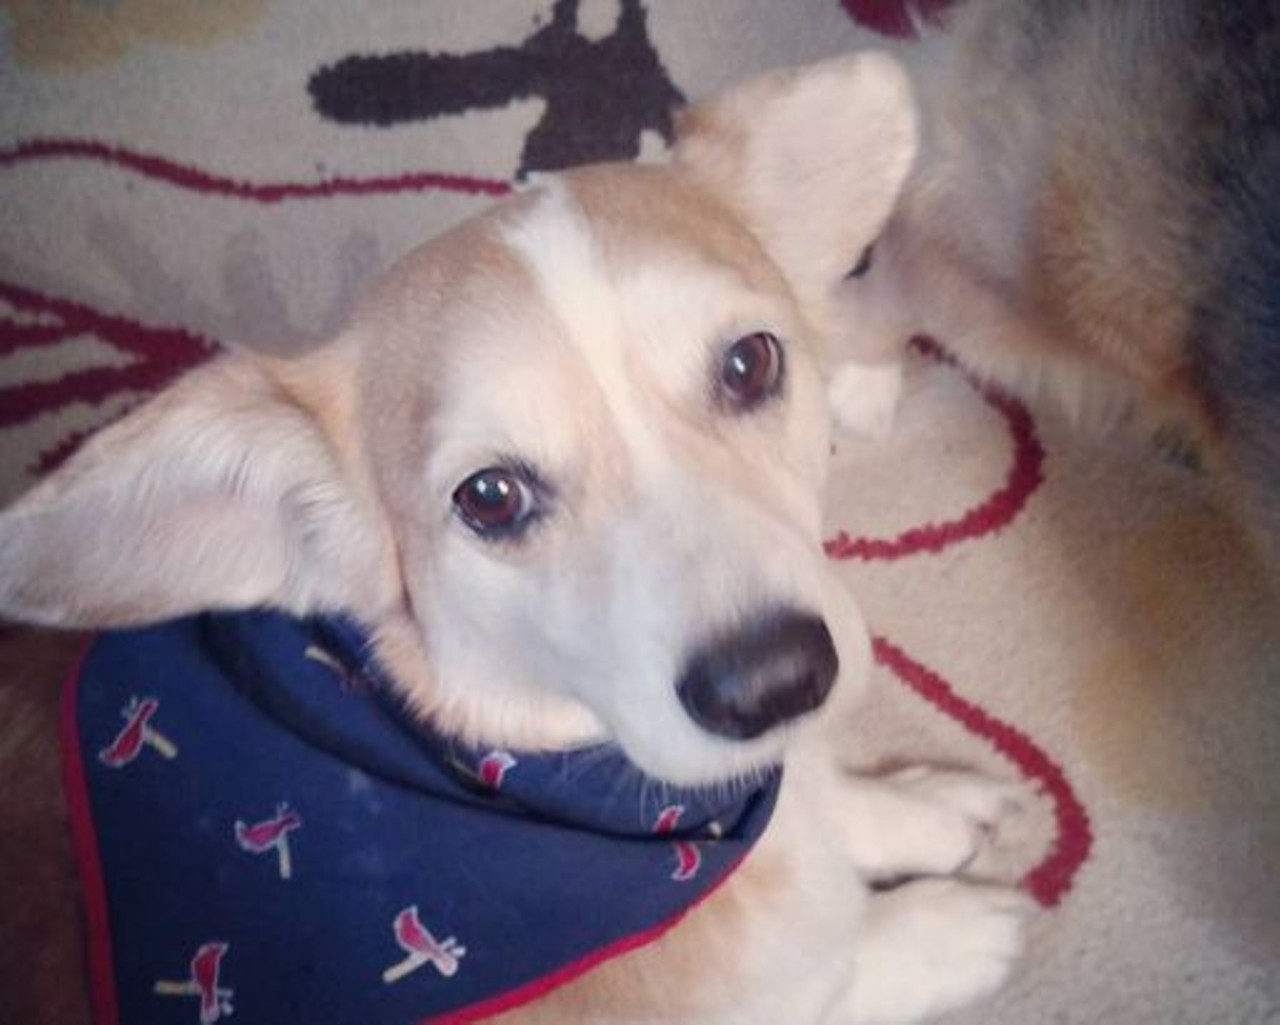 Everyone should have a Cardinals bandana. It's only right. Photo courtesy of Instagram / roser42697.